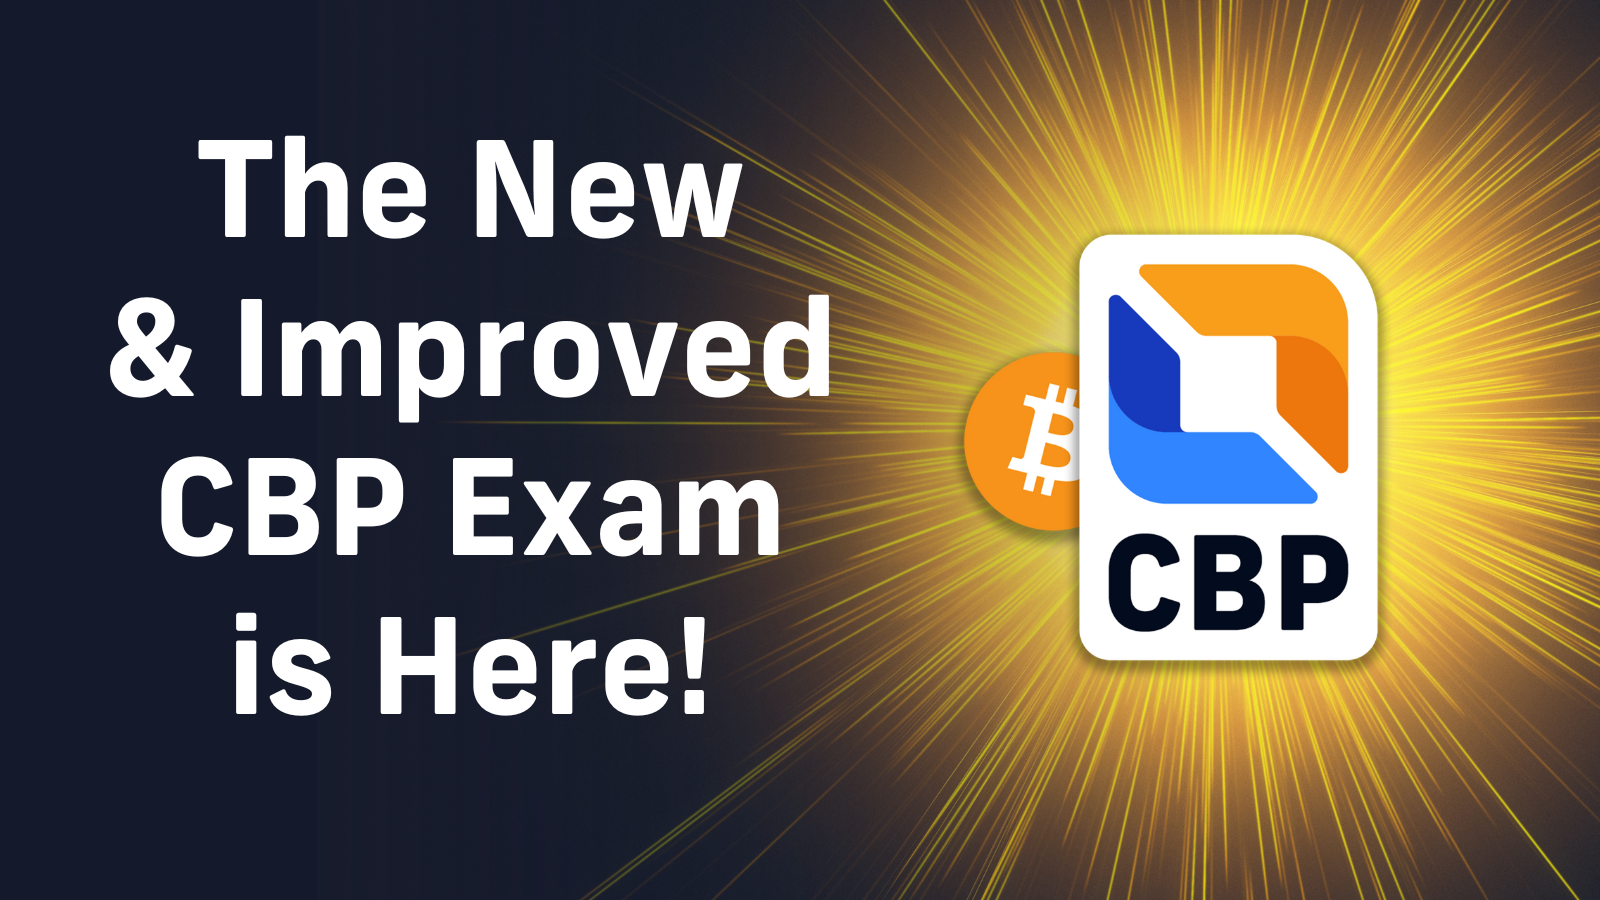 The New and Improved CBP Exam is Here!